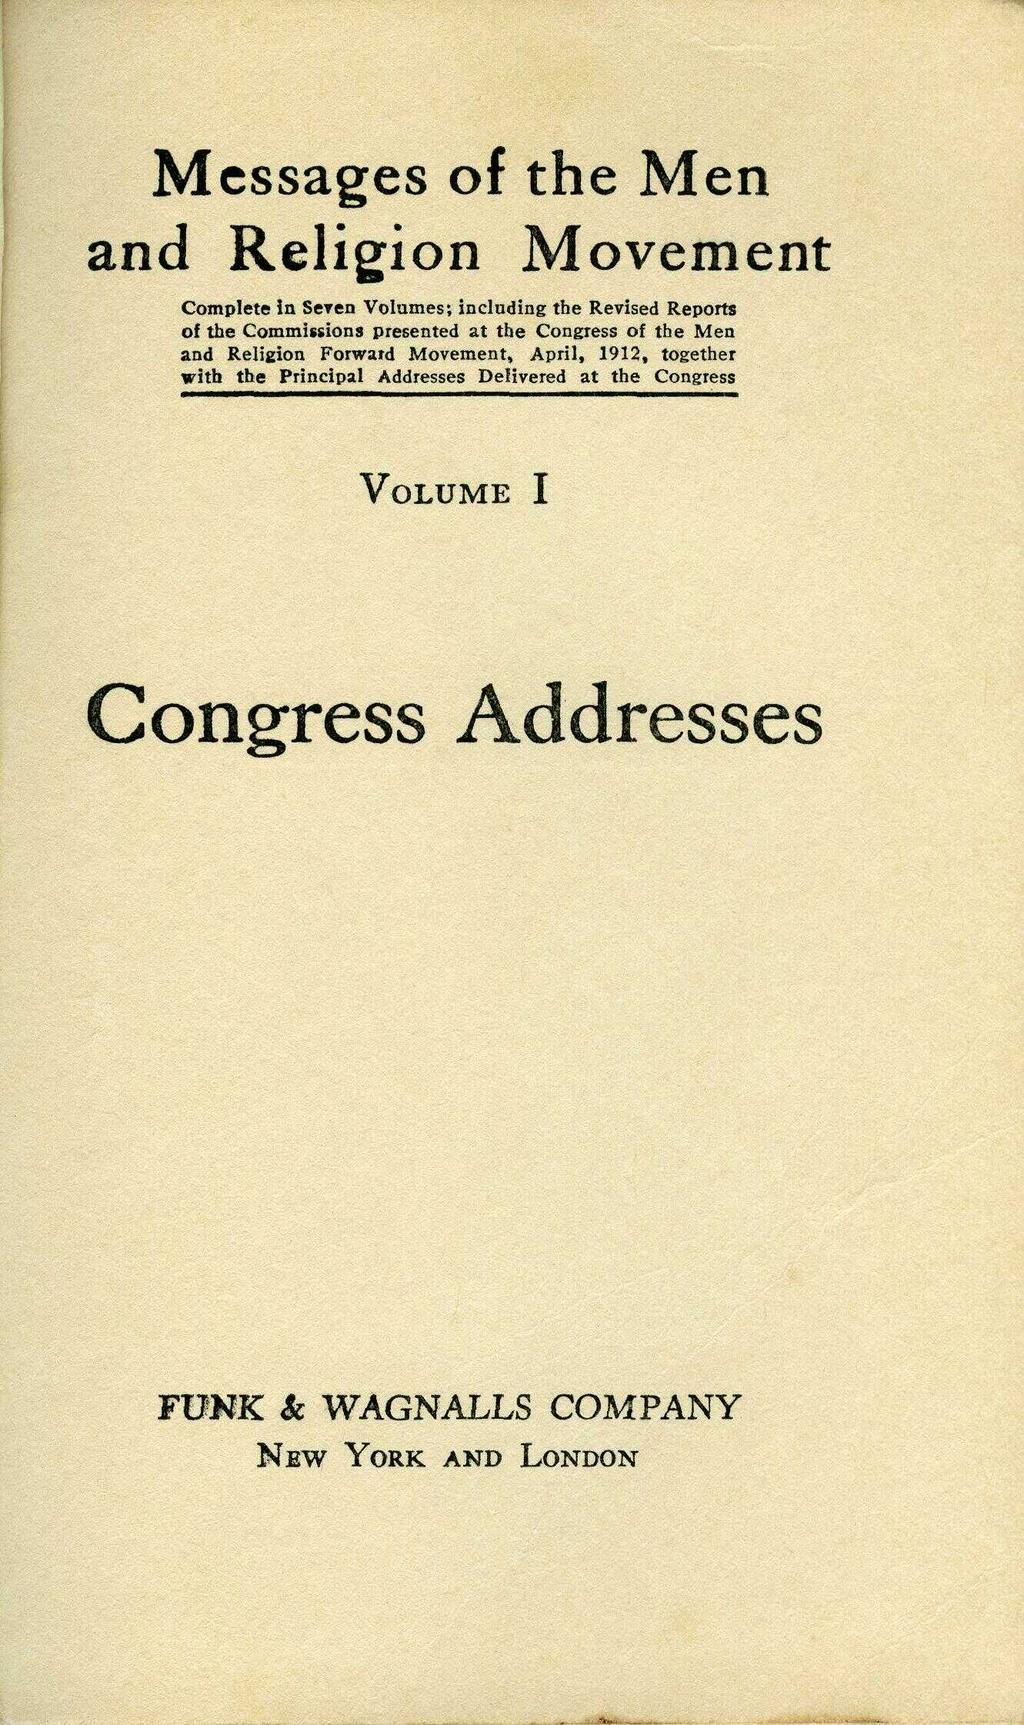 Messages of the Men and Religion Movement Complete in Seven Volumesi including the Revised Reports of the Commissions presented at the Congress of the Men and